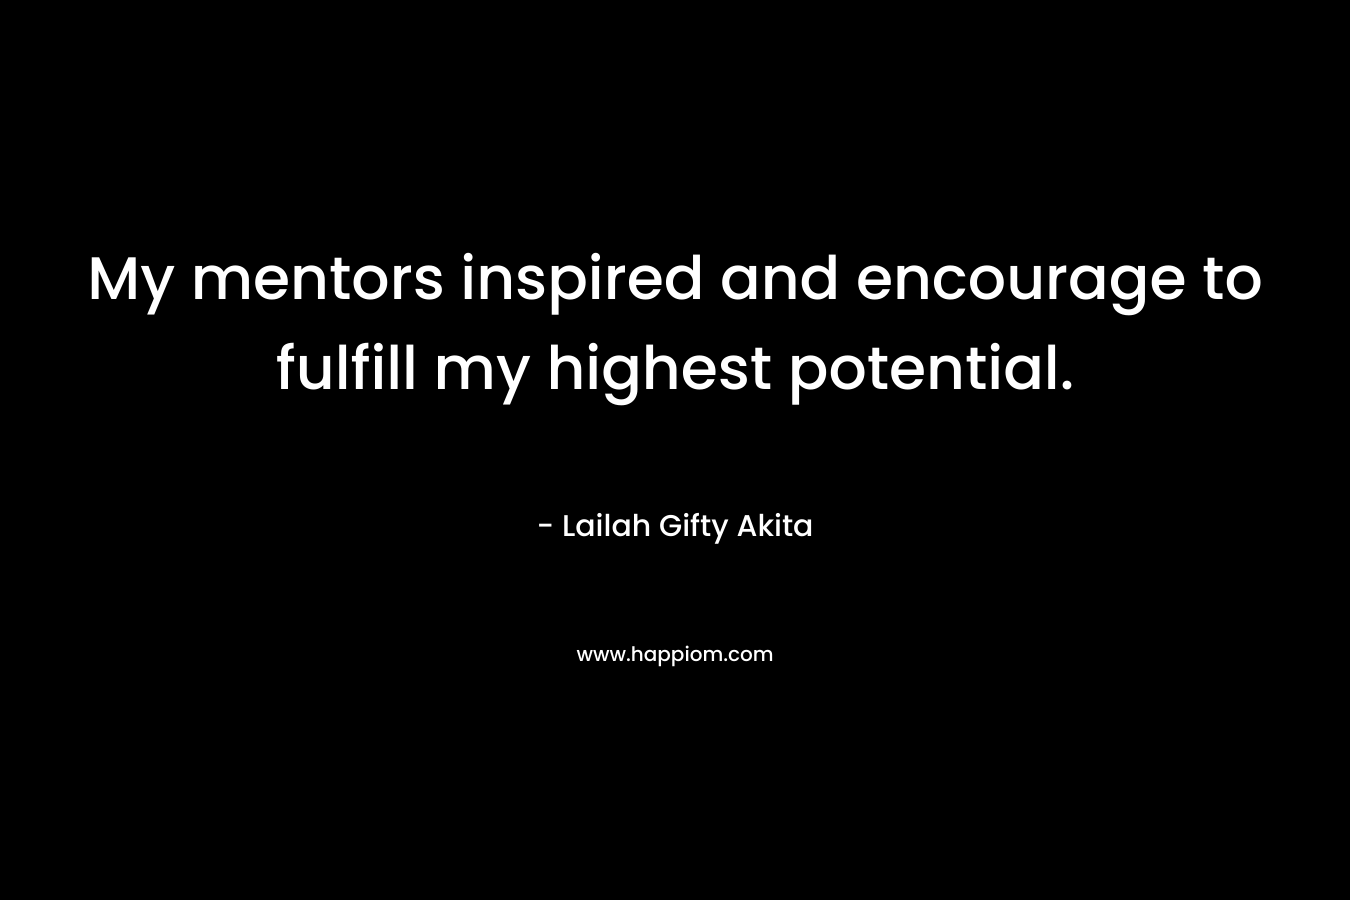 My mentors inspired and encourage to fulfill my highest potential. – Lailah Gifty Akita